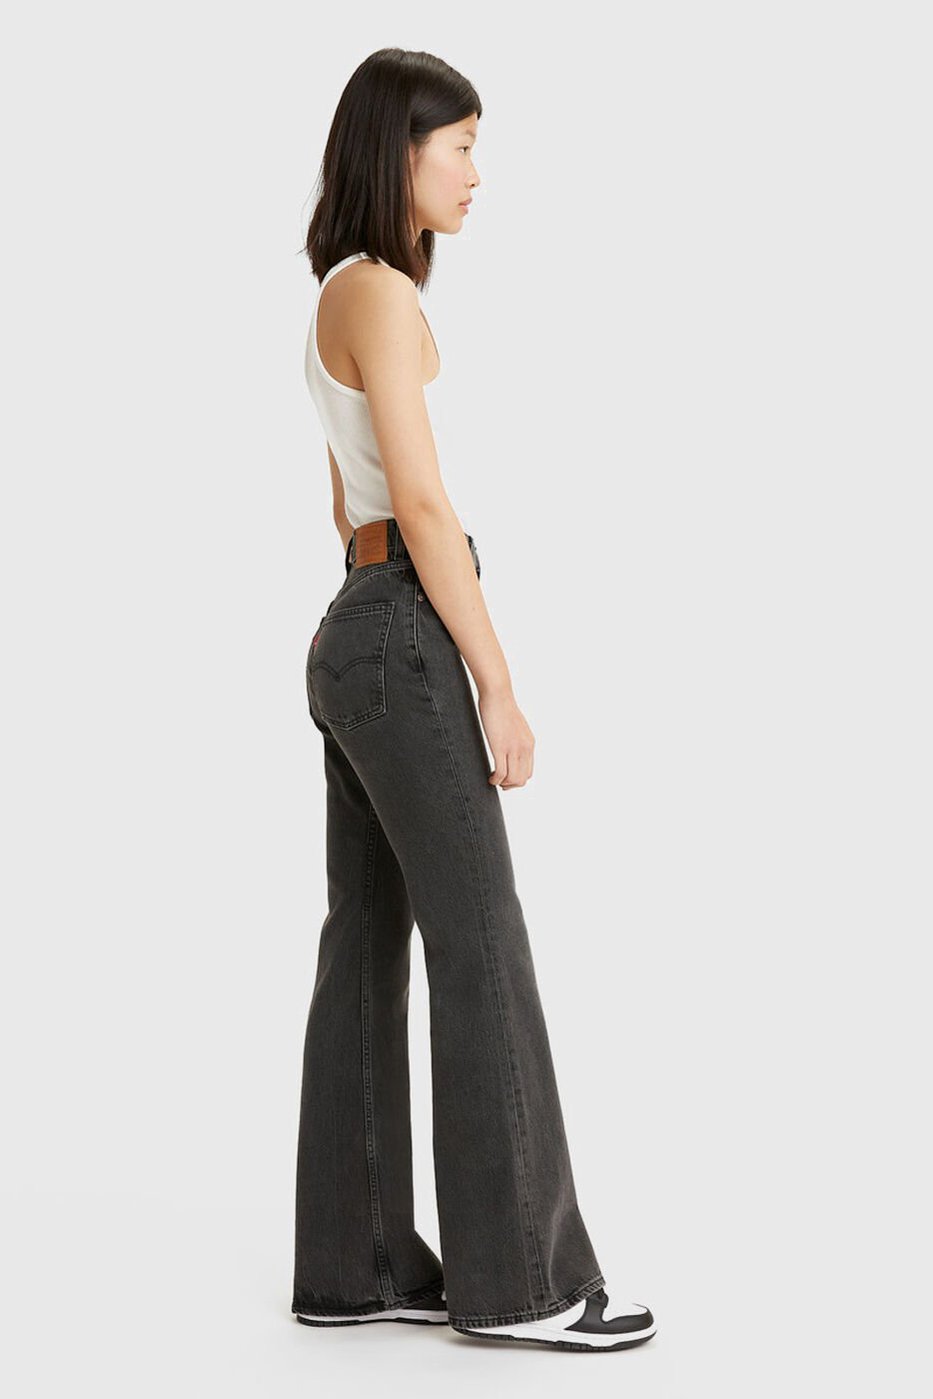 Levi's 70's High Rise Flare - Such A Doozie - Maude